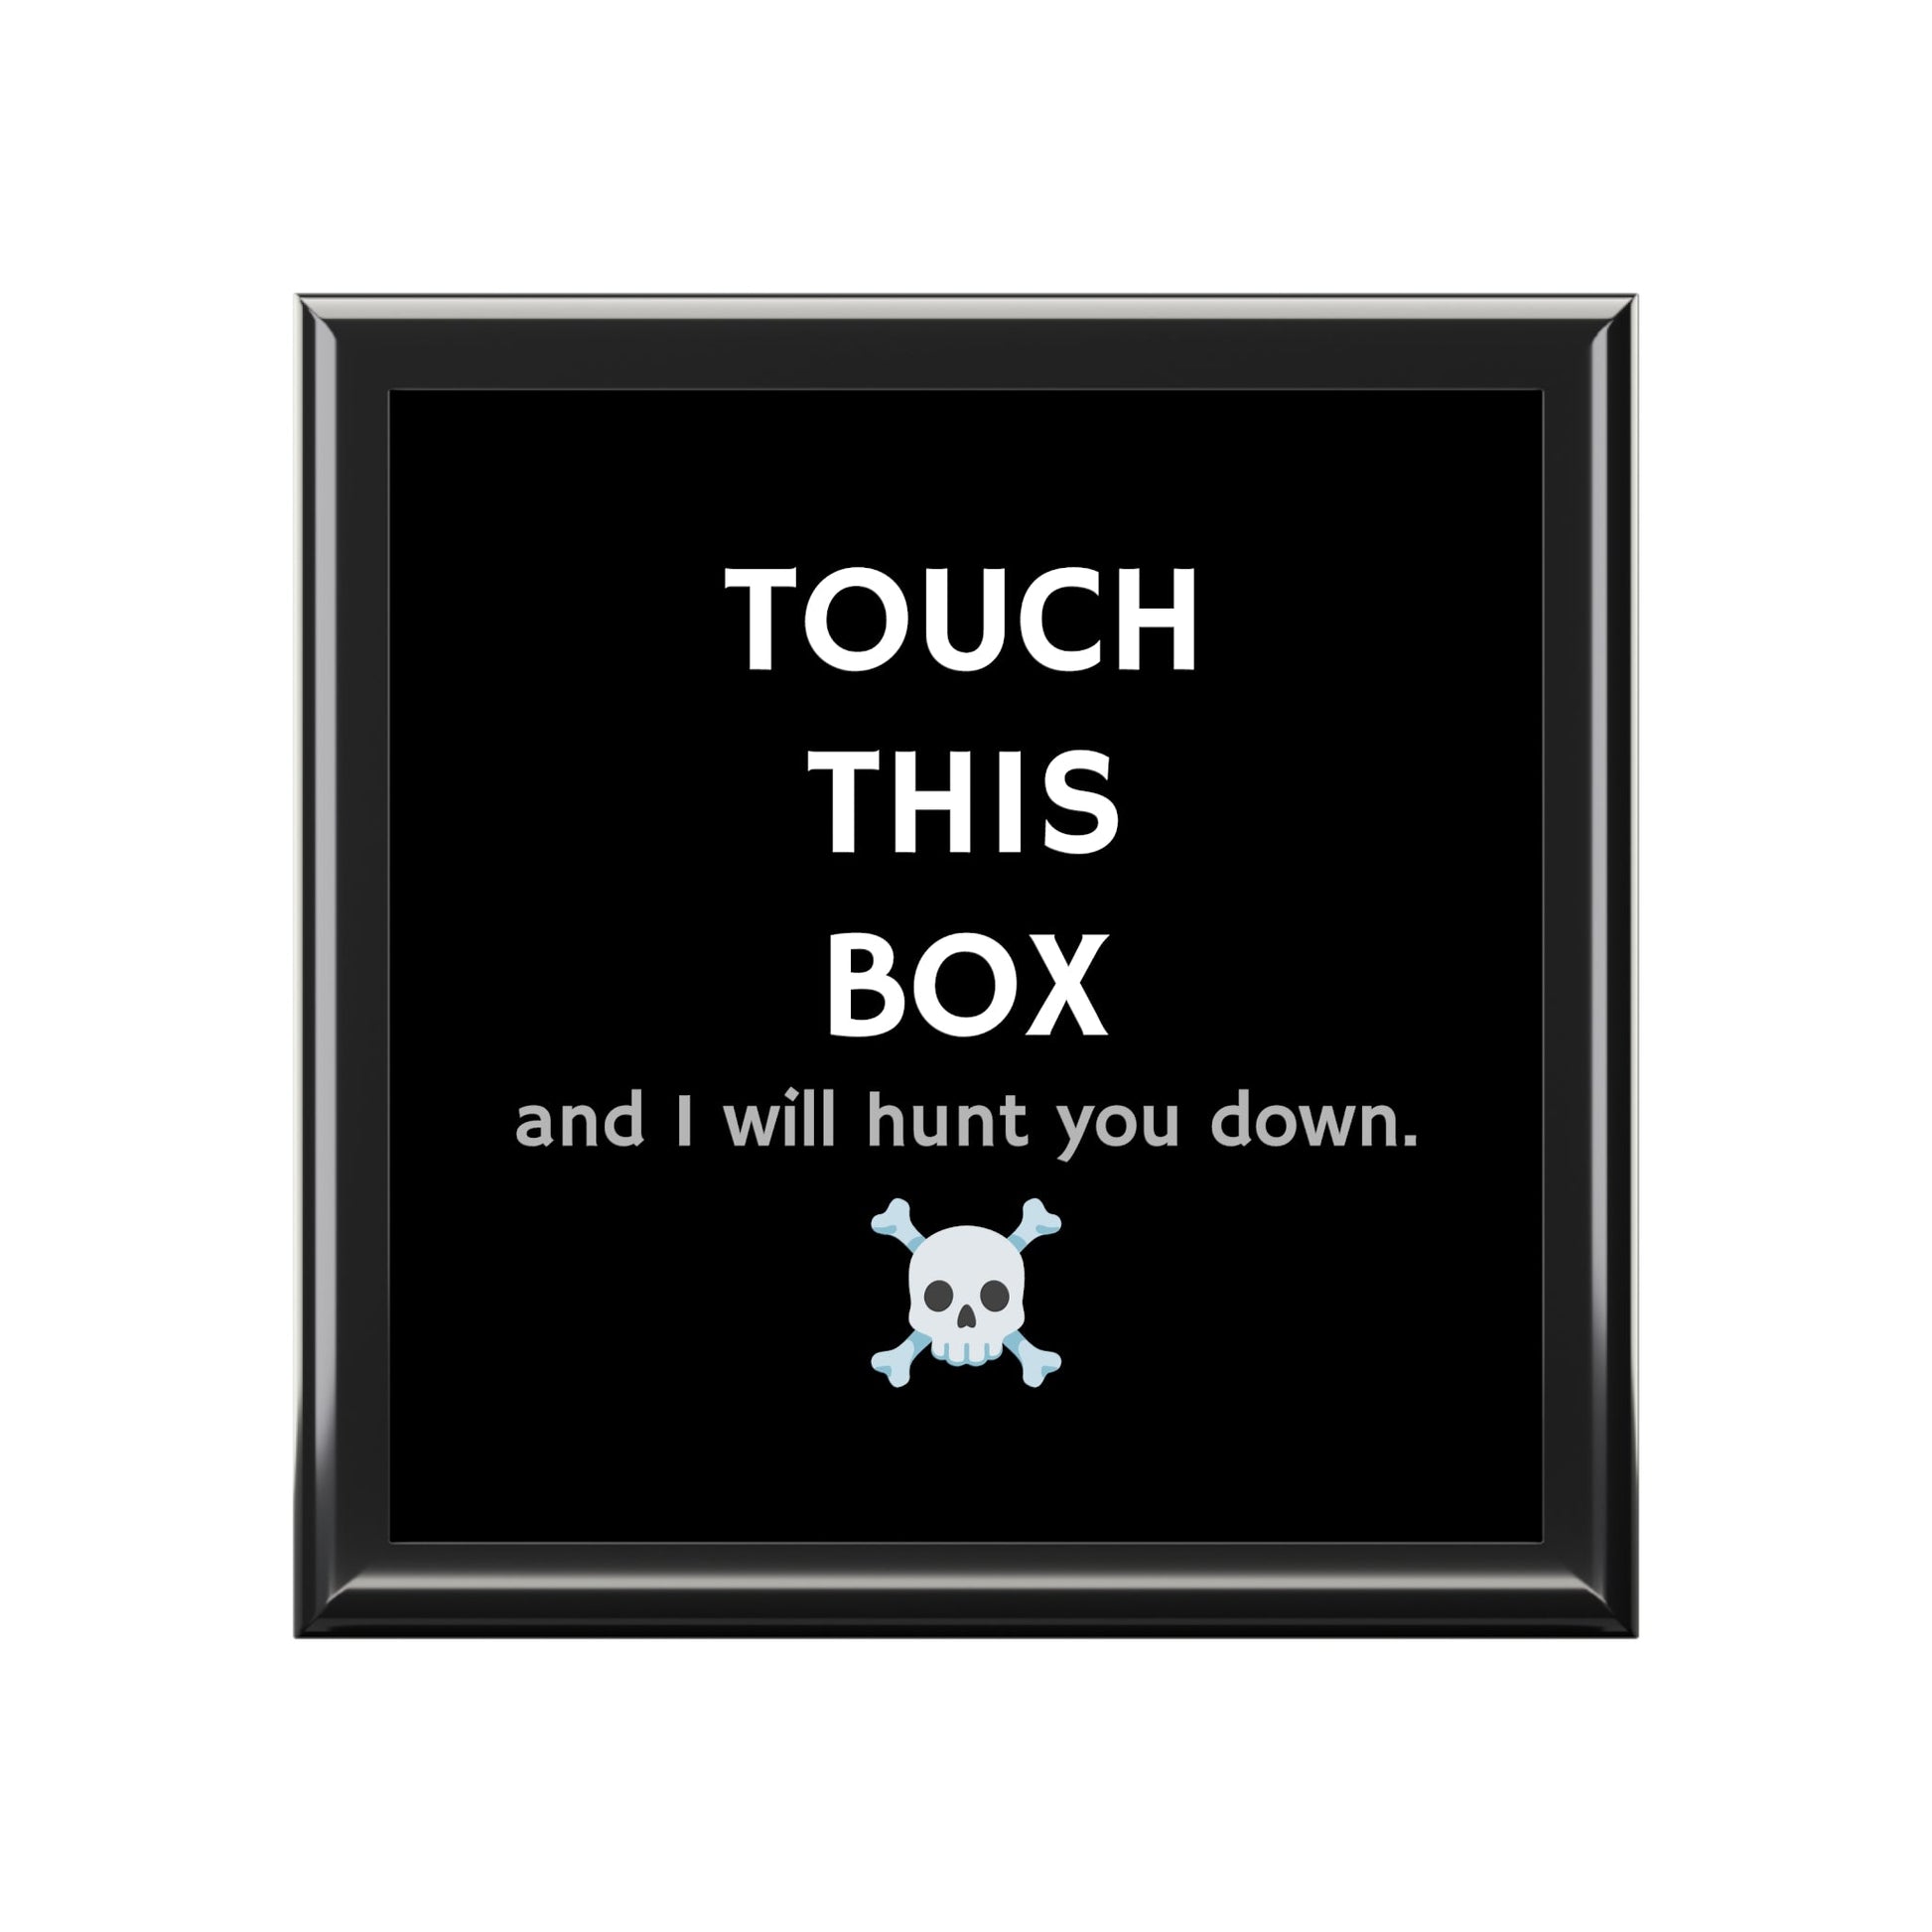 Touch This Box and I will hunt you down. Box. Mementos. Souvenirs. Favorite Things.